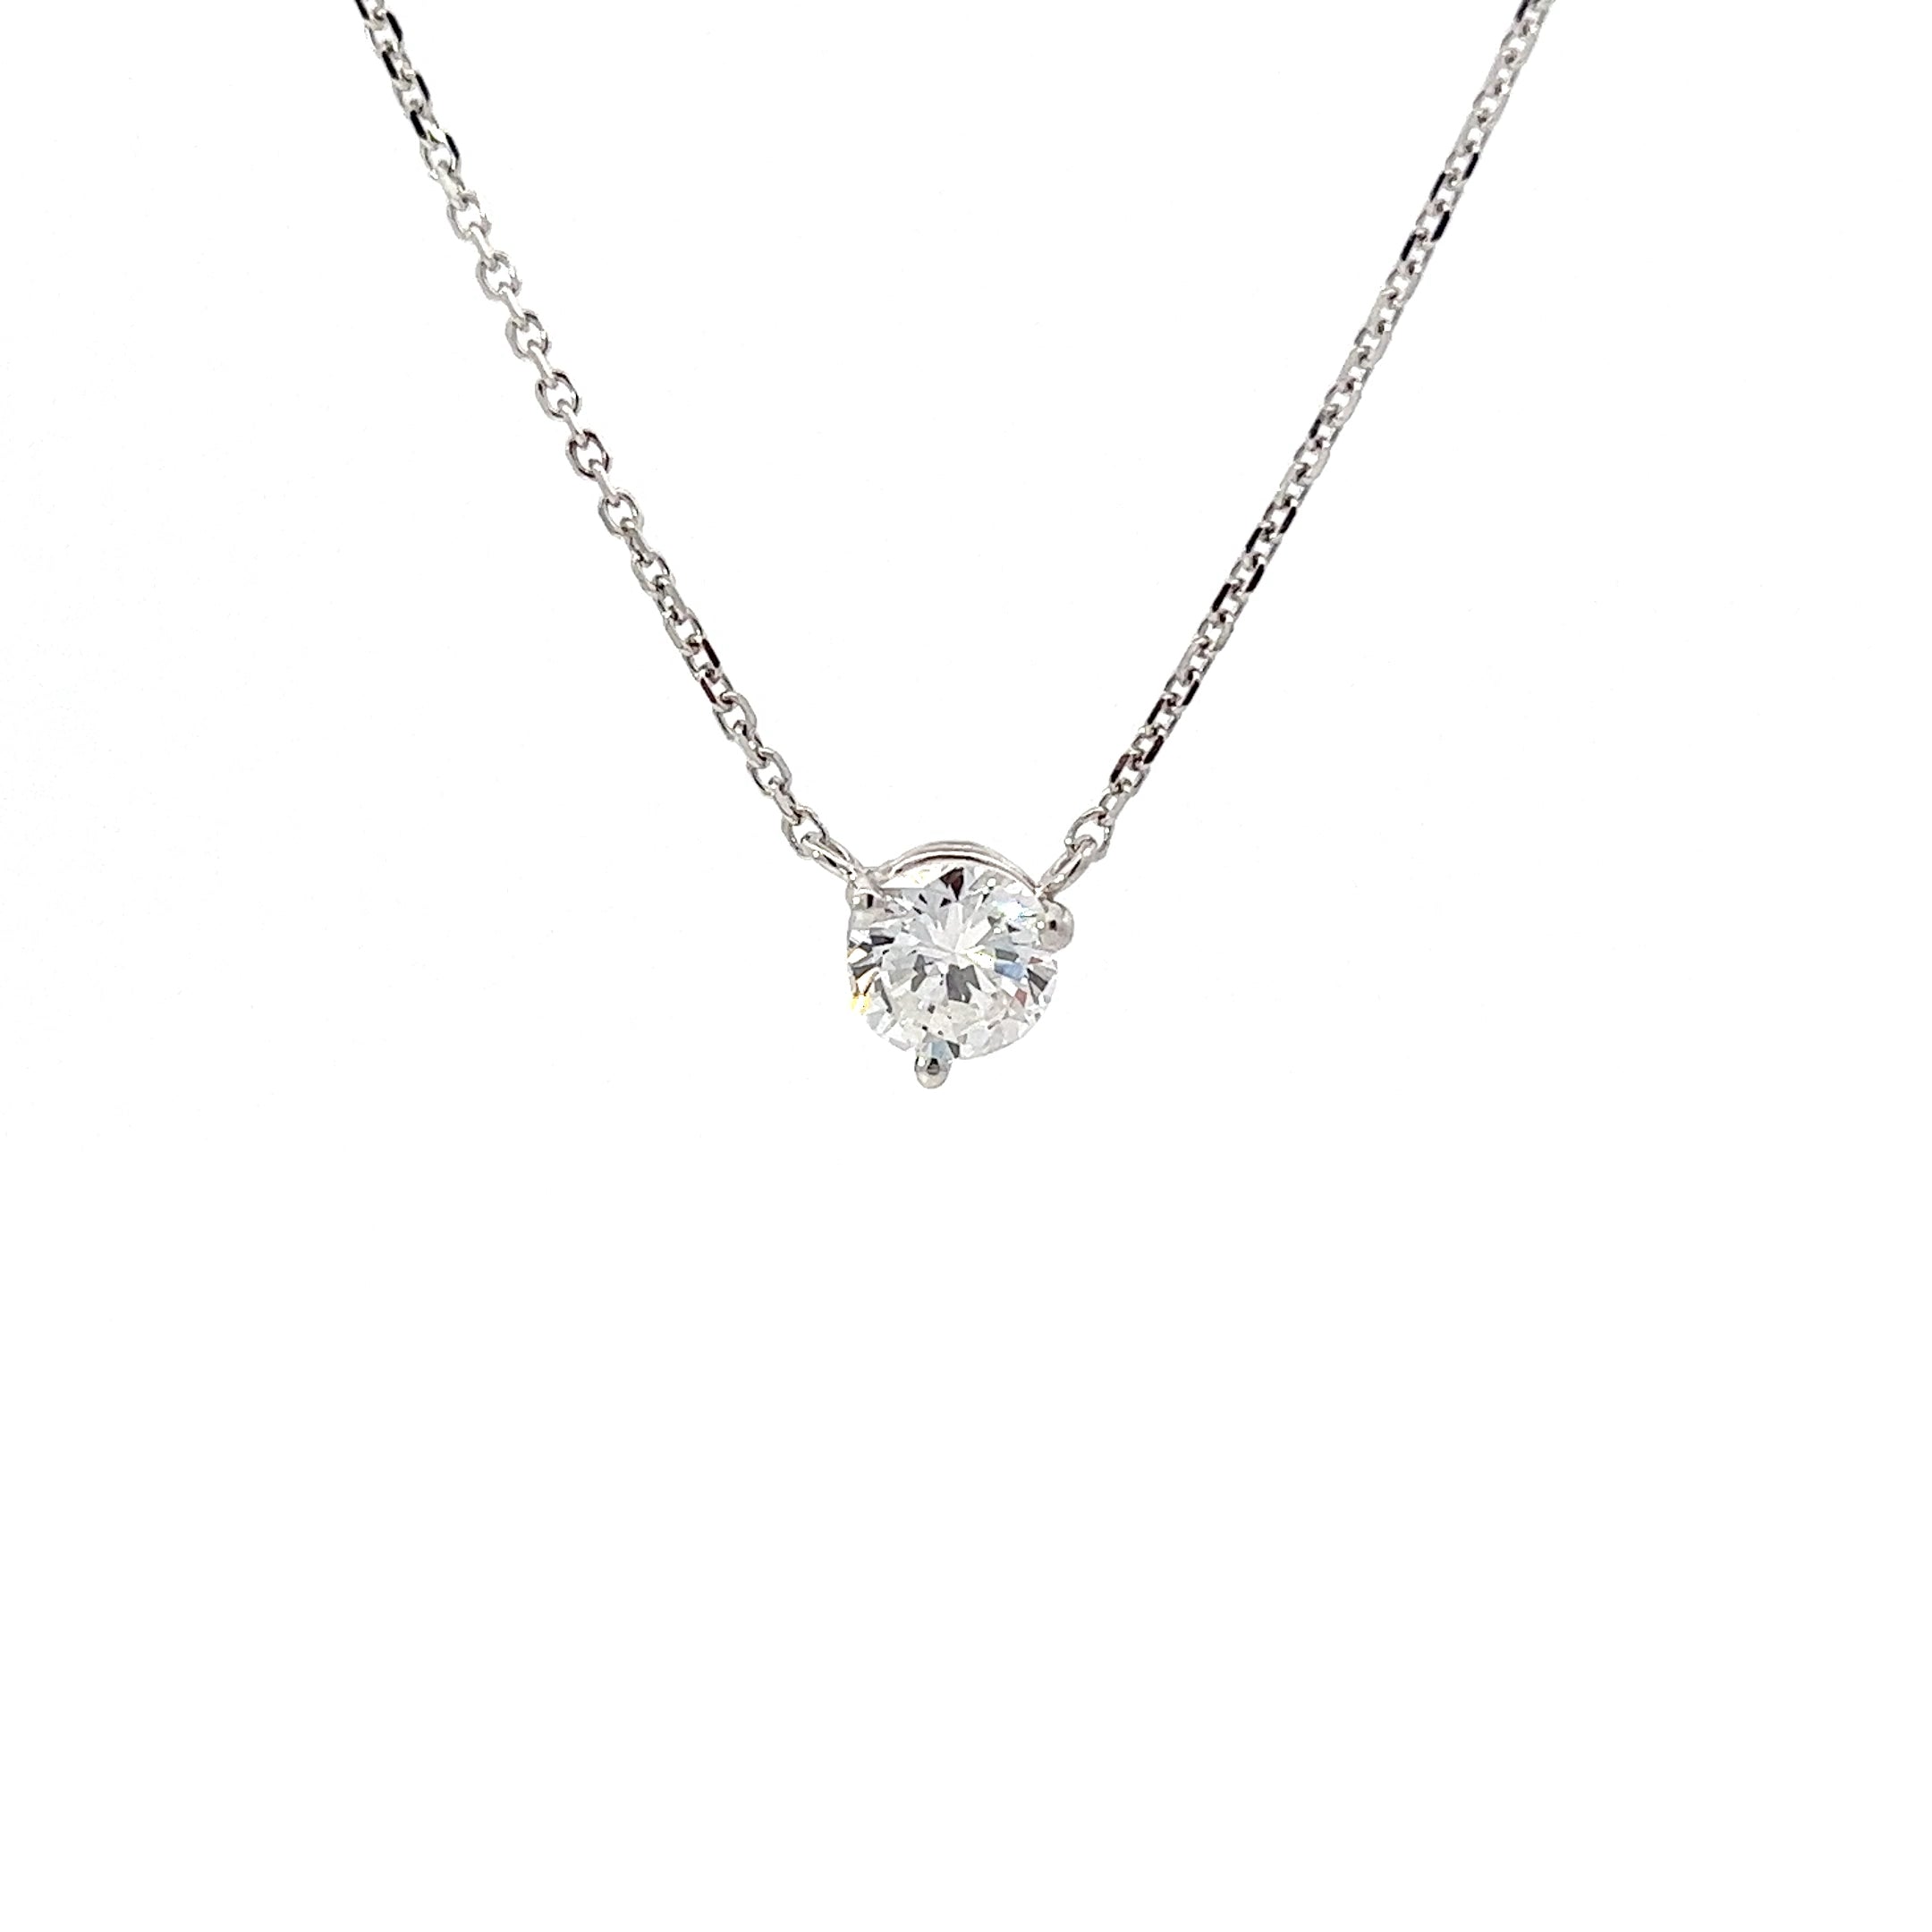 LaViano Jewelers 14K White Gold Diamond Necklace - Necklaces